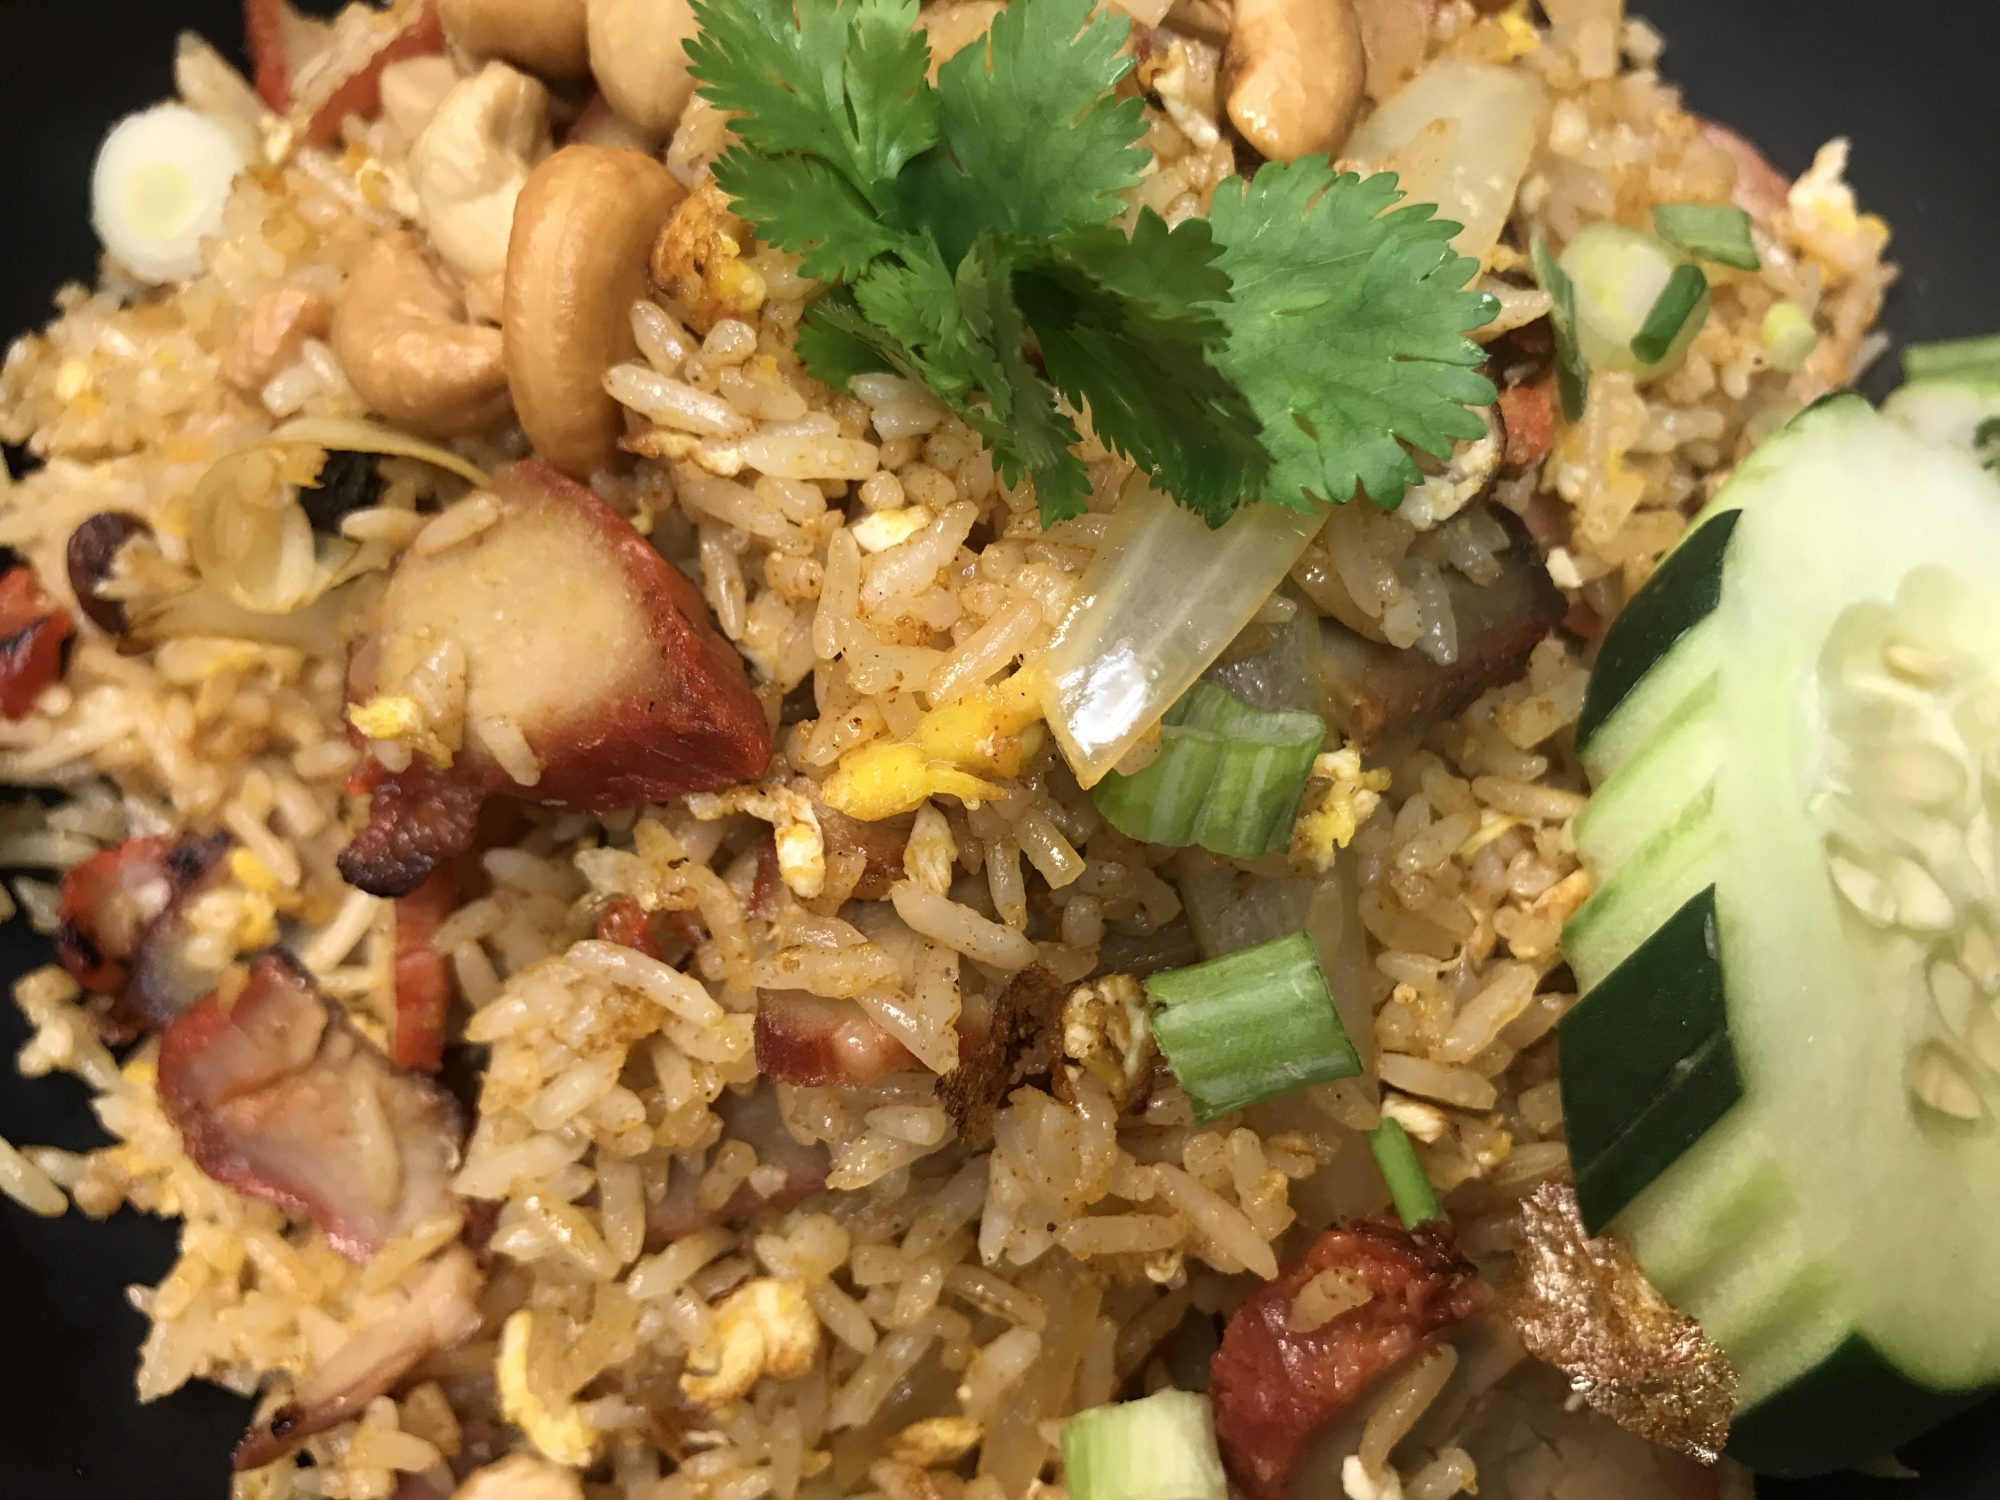 Thai Kitchen Offers Catering to the St. Louis Region